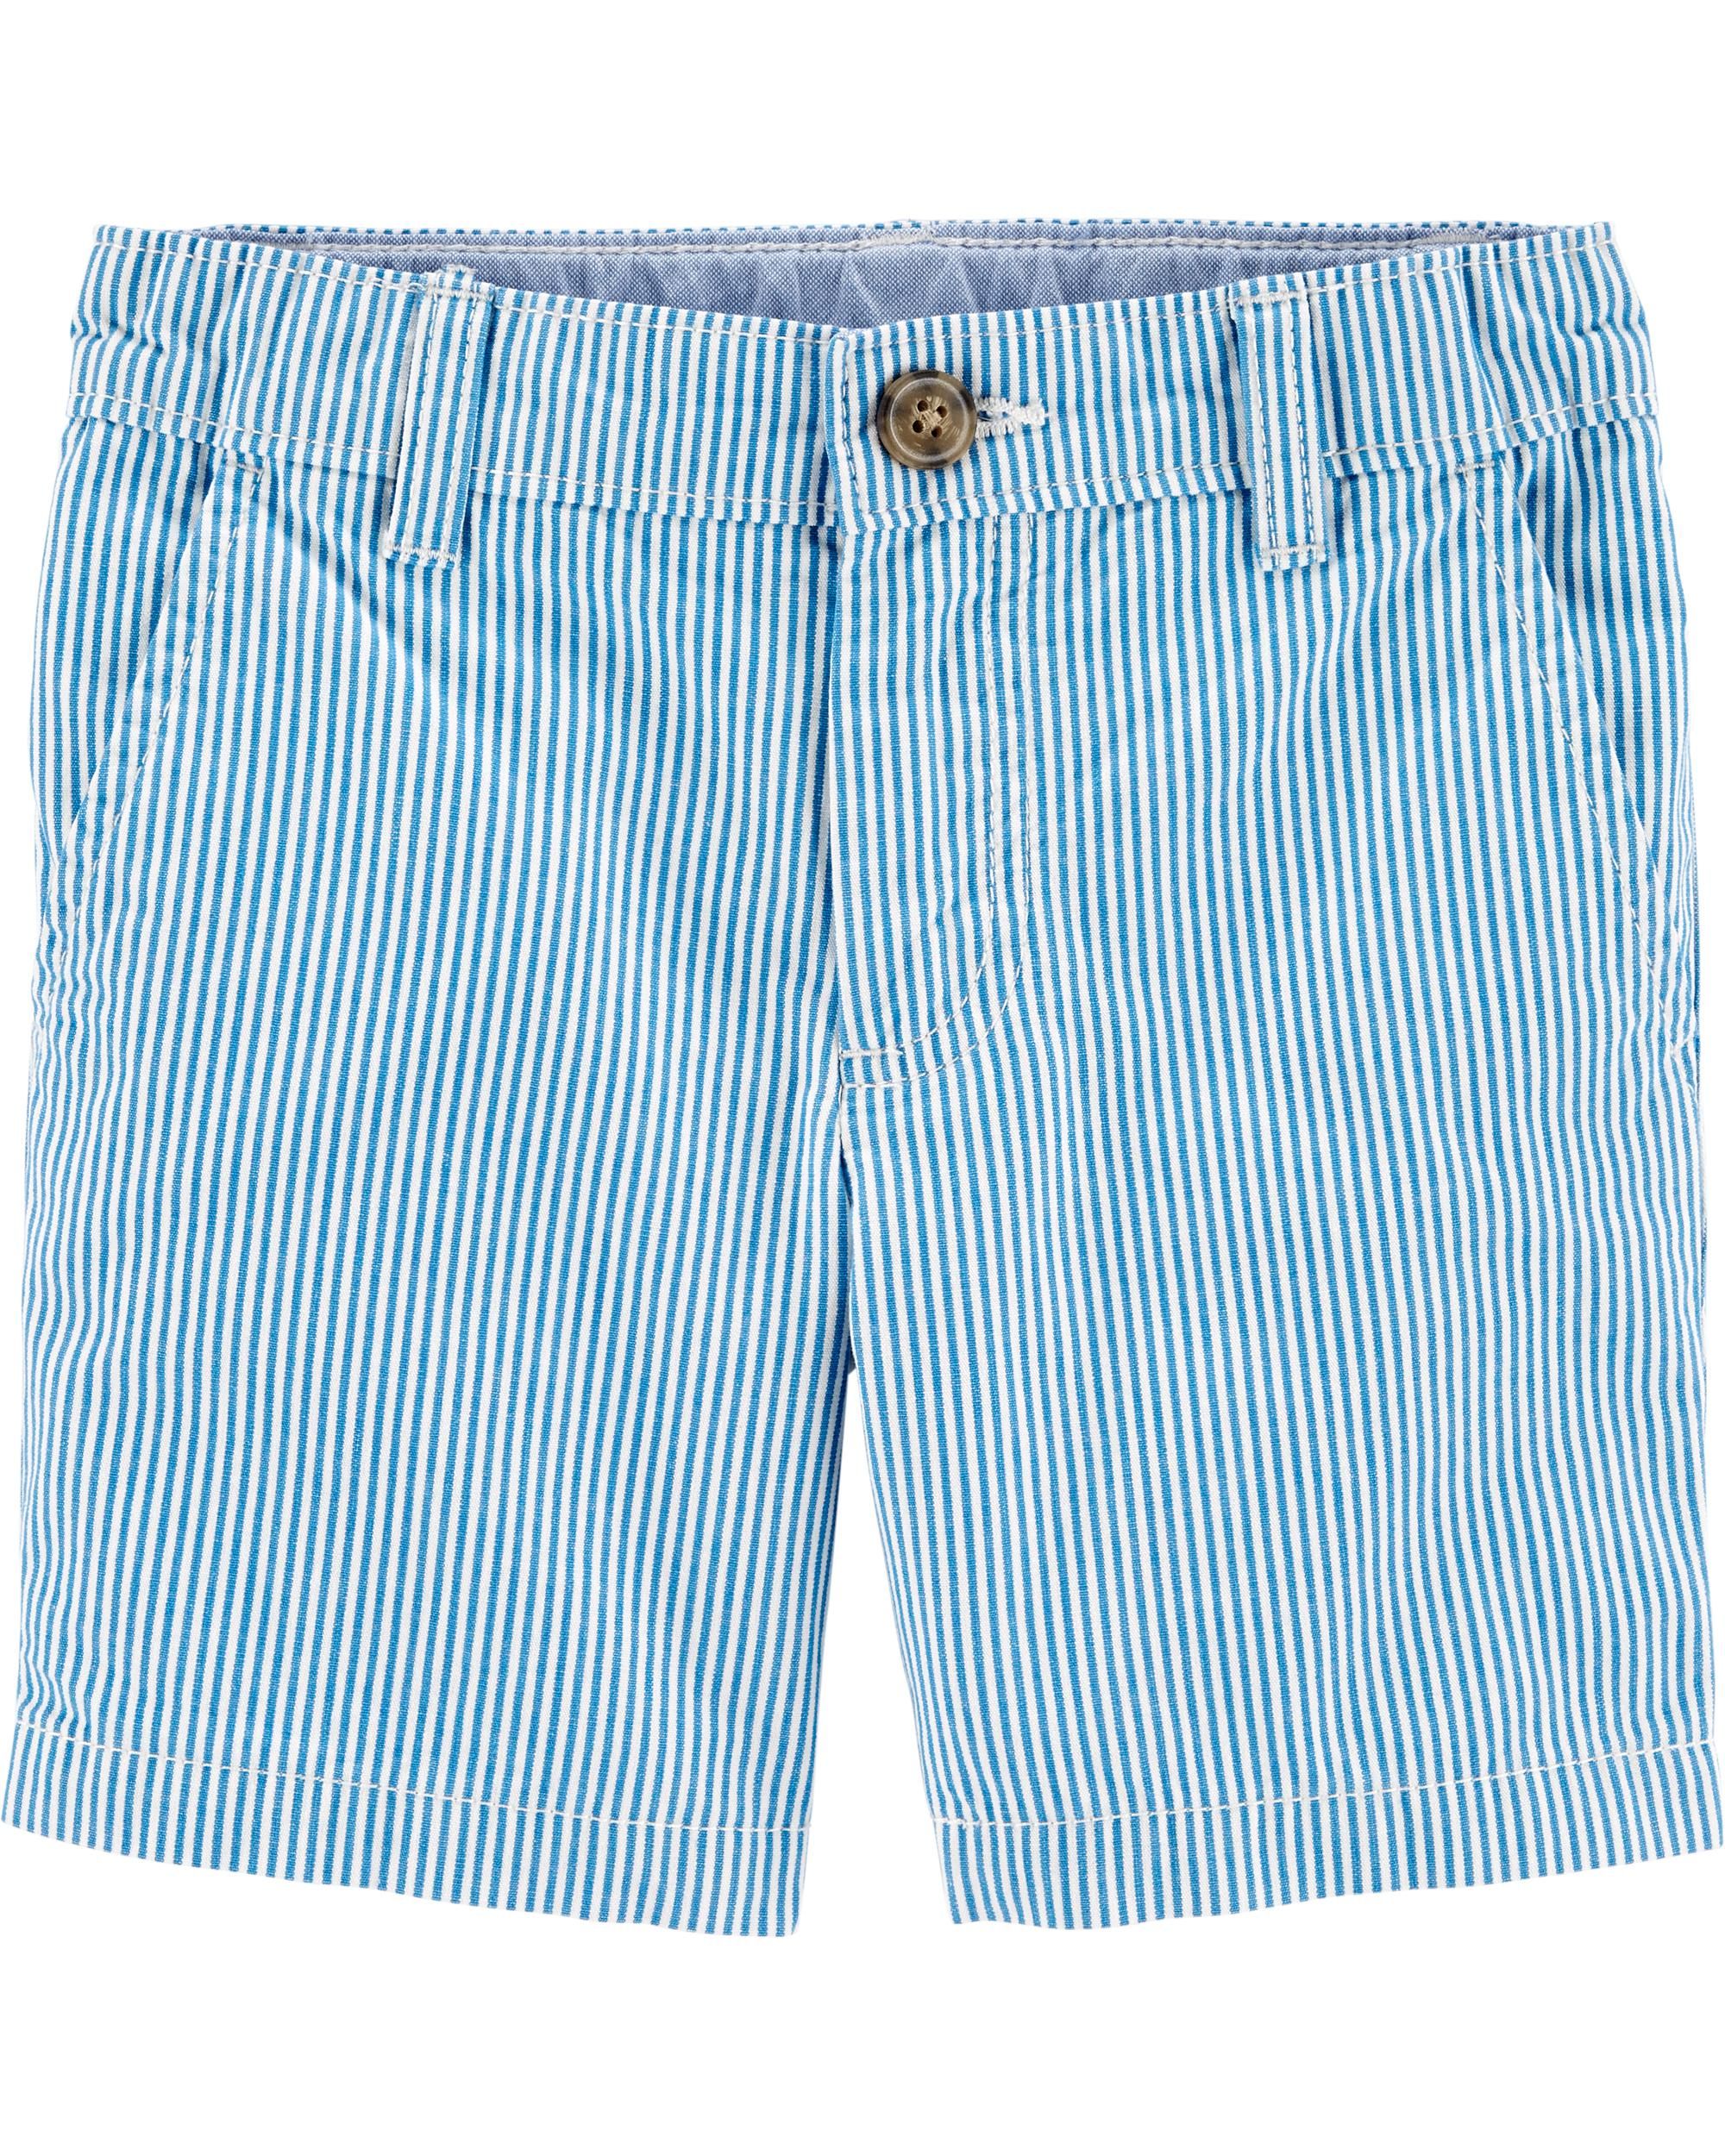 Striped Flat-Front Shorts | Carter's